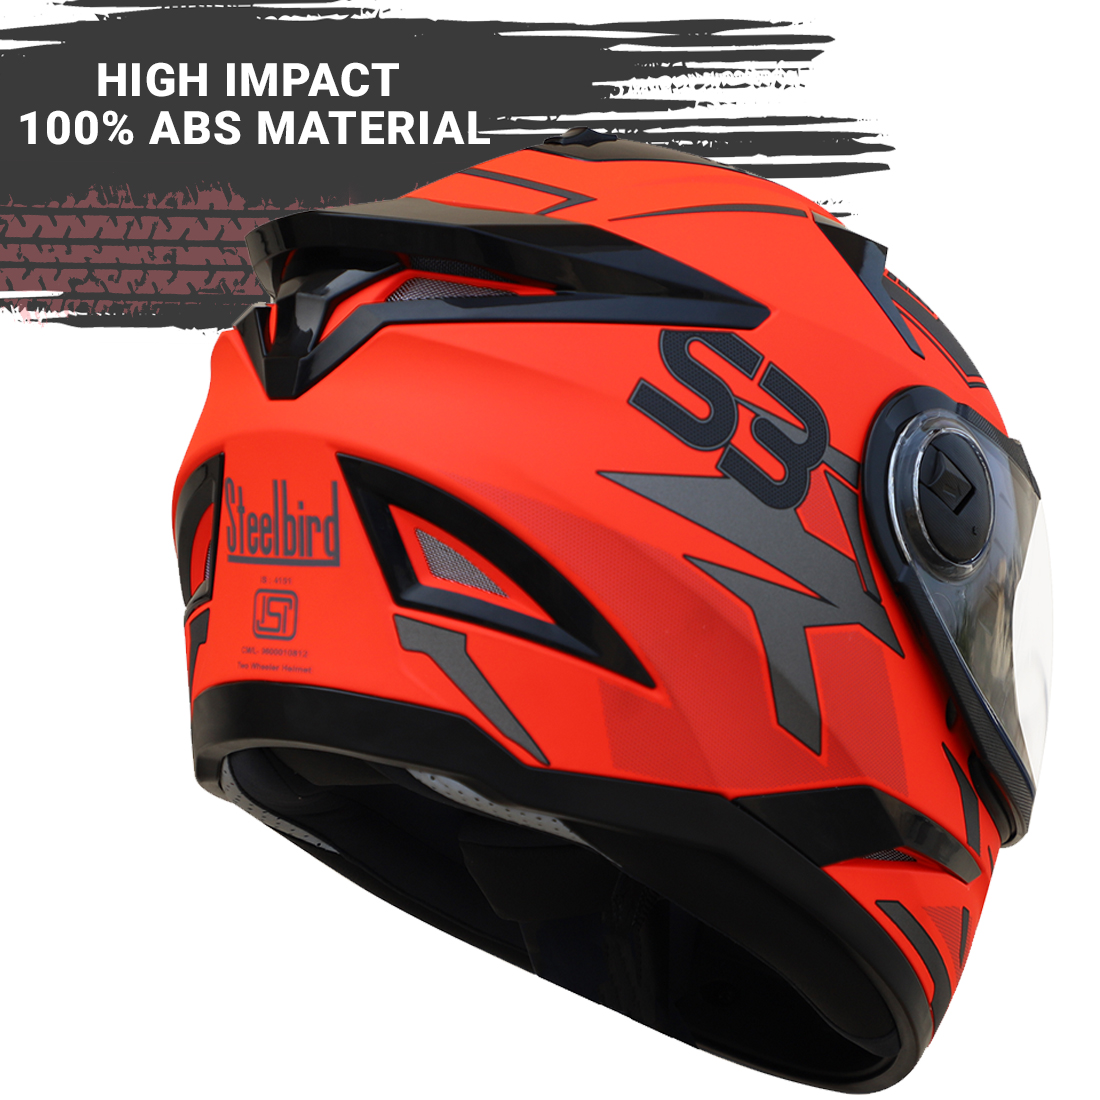 Steelbird SBH-17 Terminator ISI Certified Full Face Graphic Helmet (Glossy Fluo Red Grey With Clear Visor)